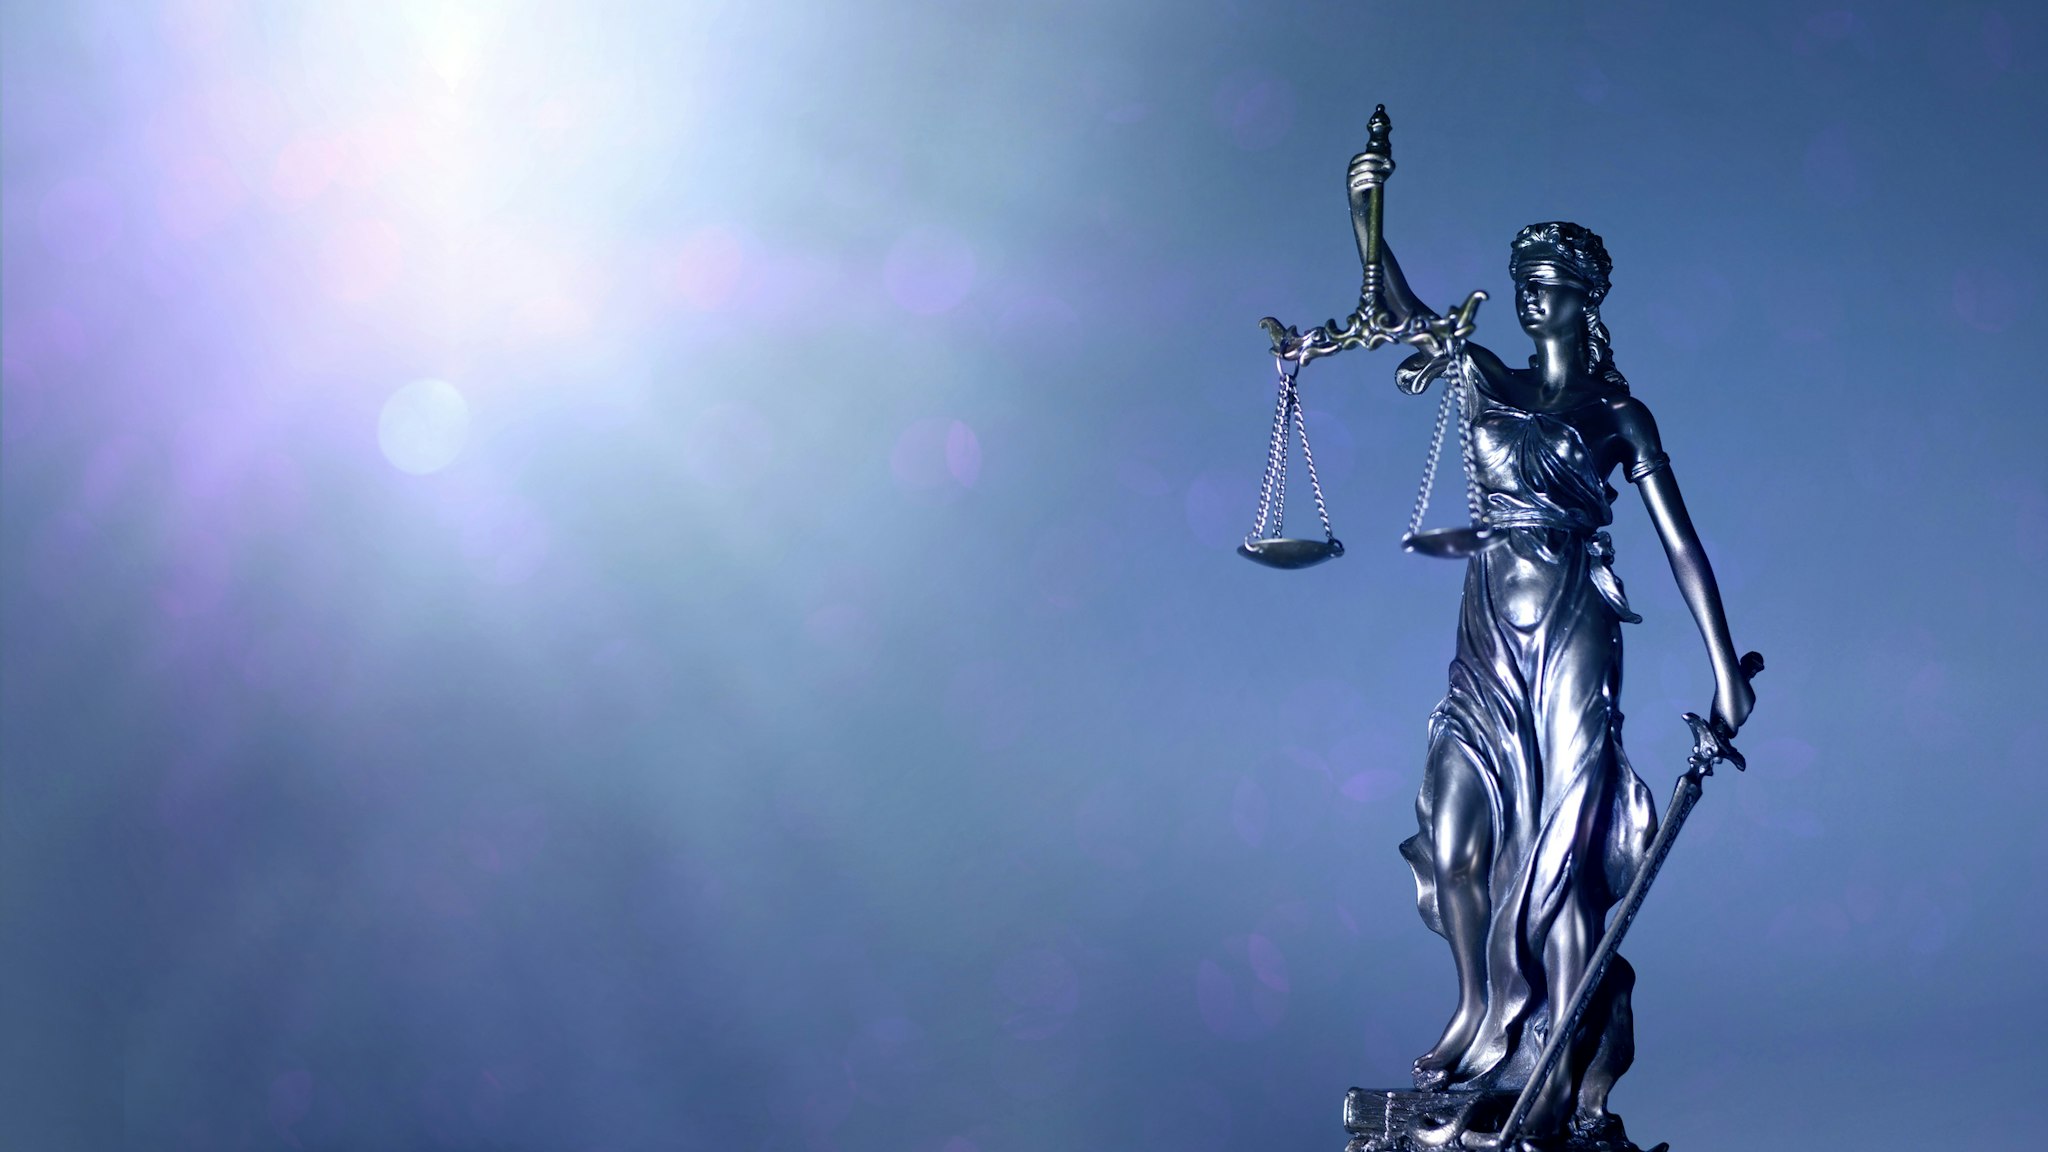 Lady Justice Or Justitia Holding Balance Scales - Panoamic Image Wih Copy Space. - stock photo